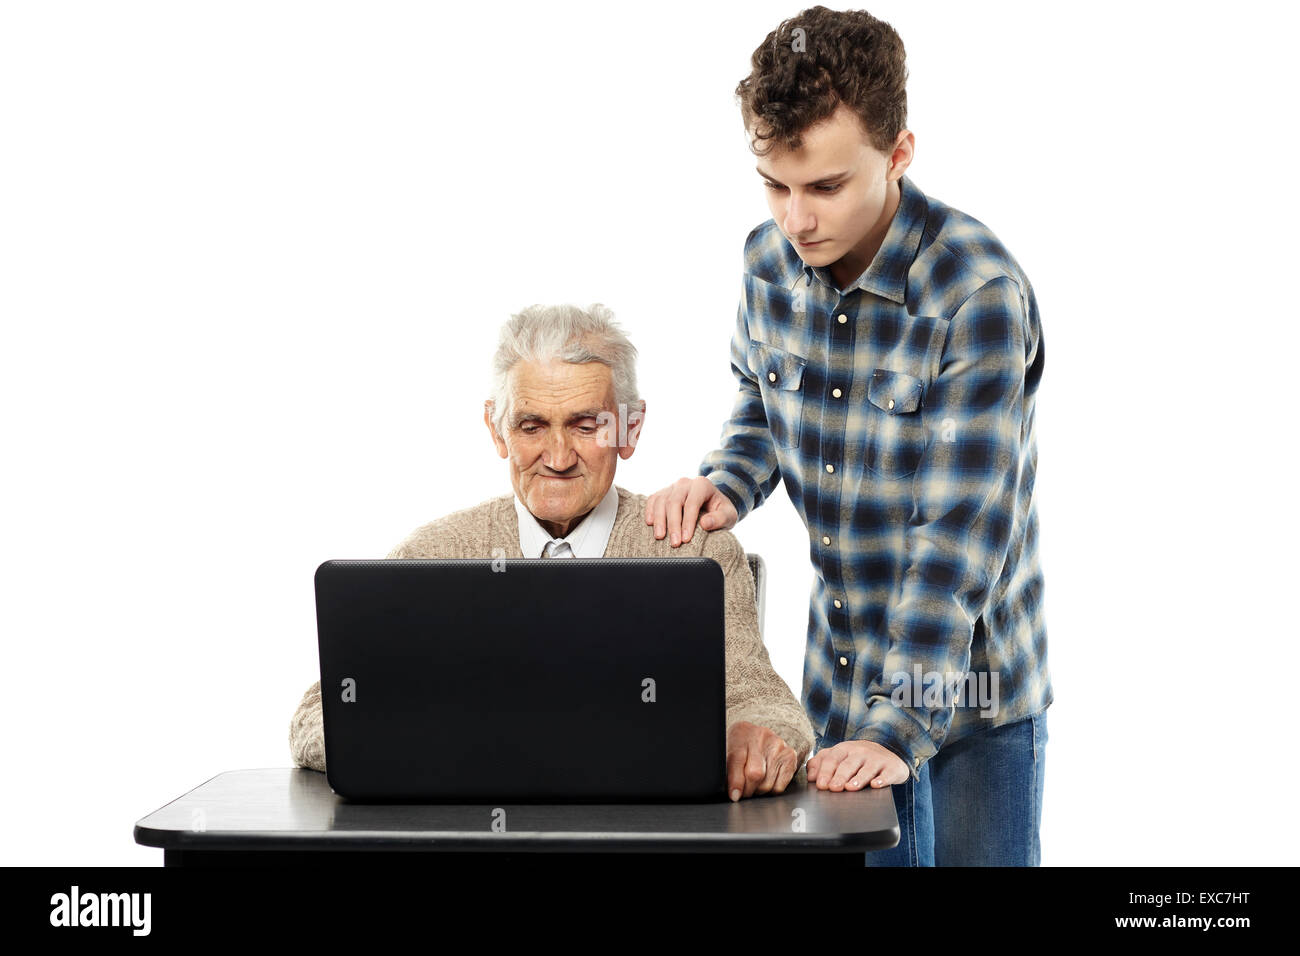 Teenager boy teaching his grandpa how to use a computer Stock Photo